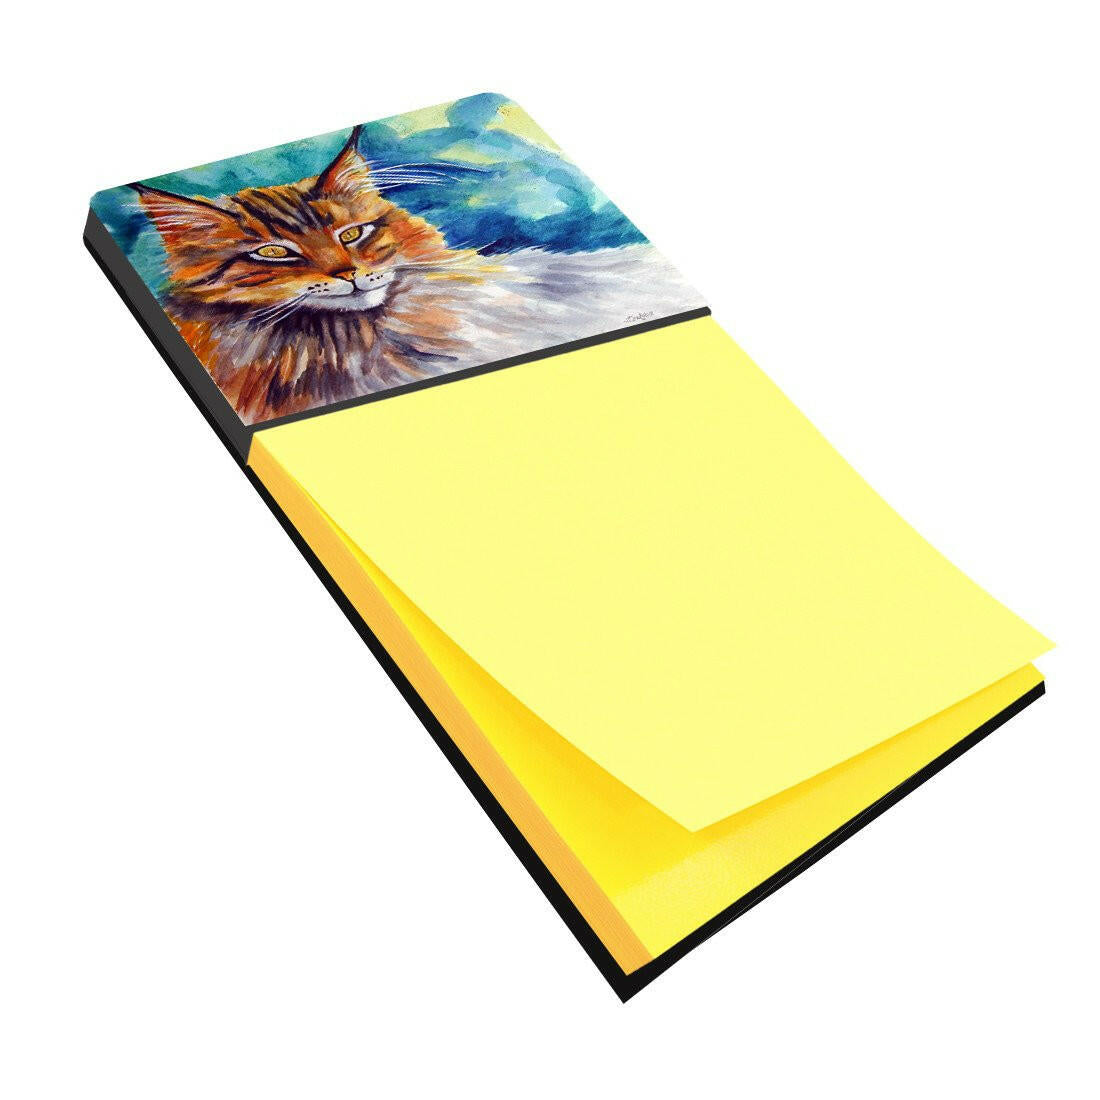 Maine Coon Cat Watching you Sticky Note Holder 7421SN by Caroline's Treasures